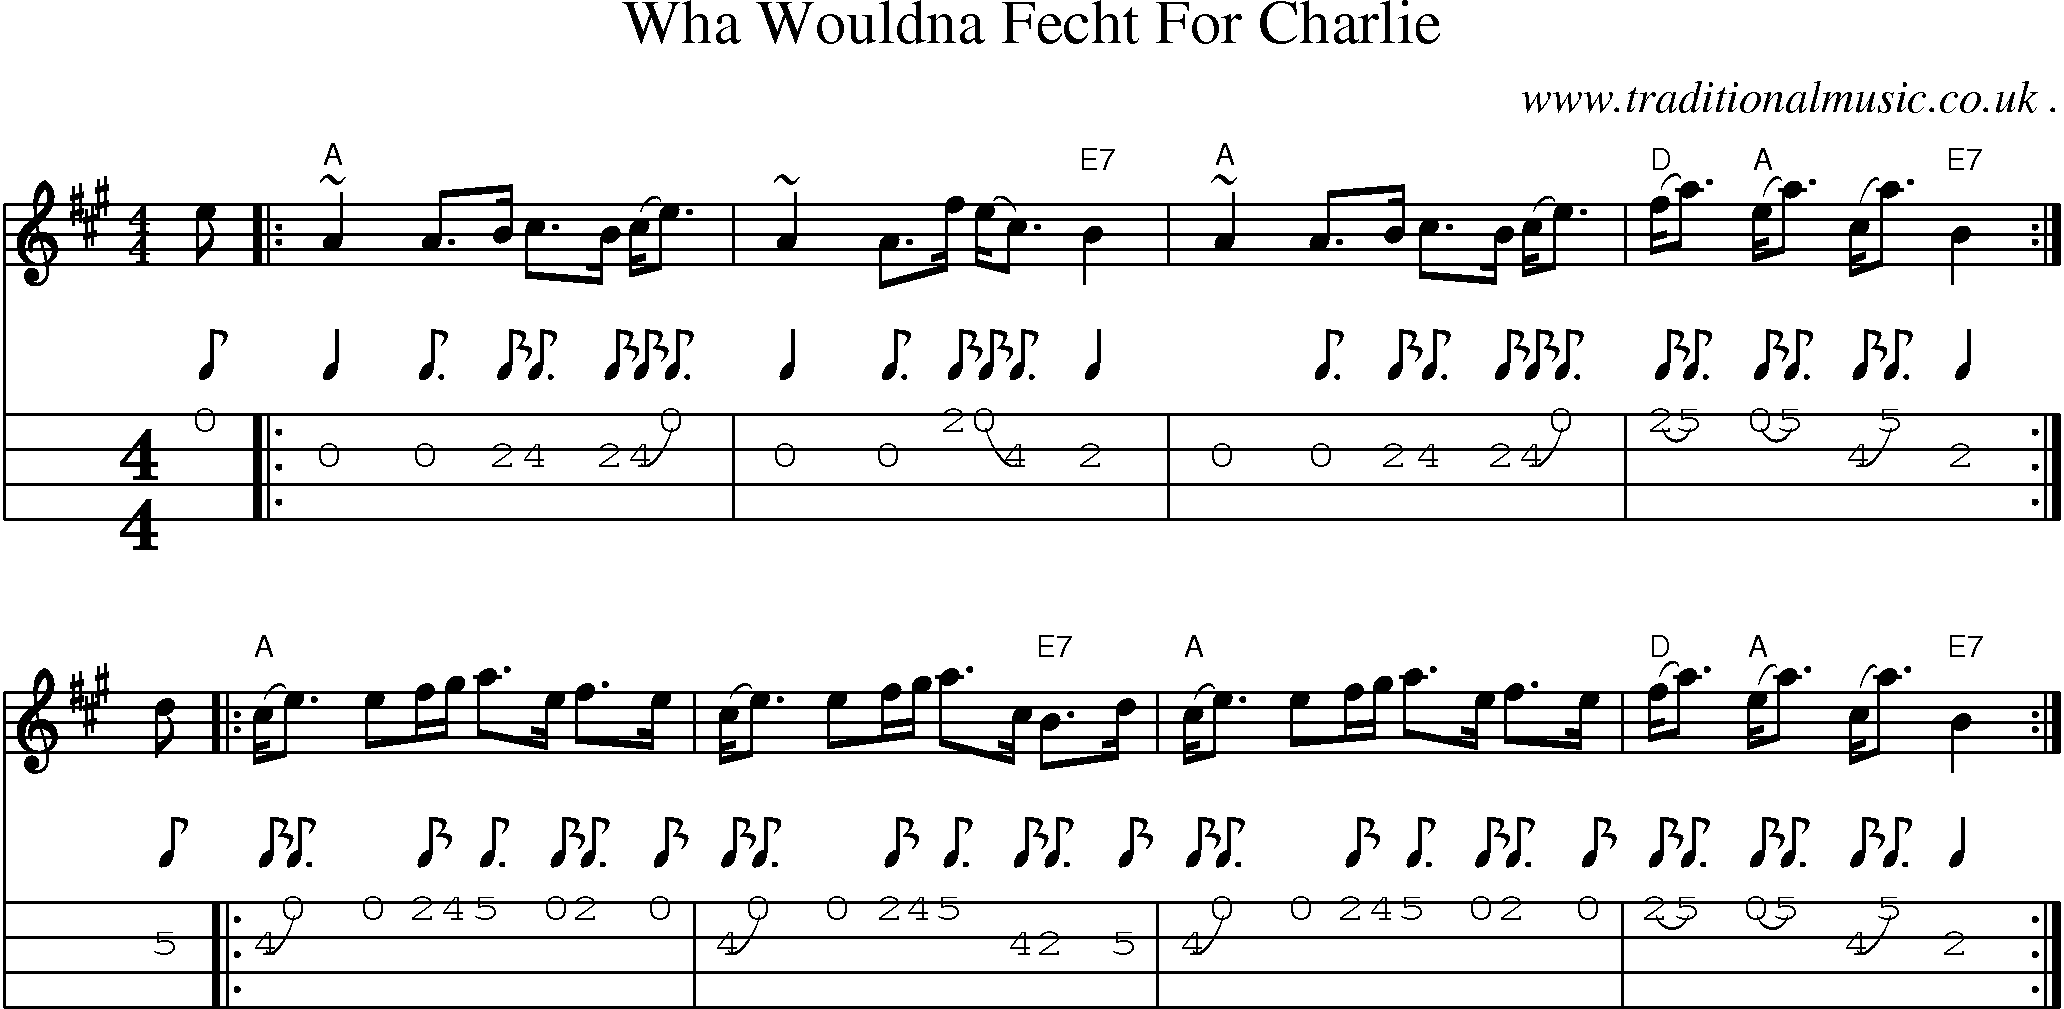 Sheet-music  score, Chords and Mandolin Tabs for Wha Wouldna Fecht For Charlie